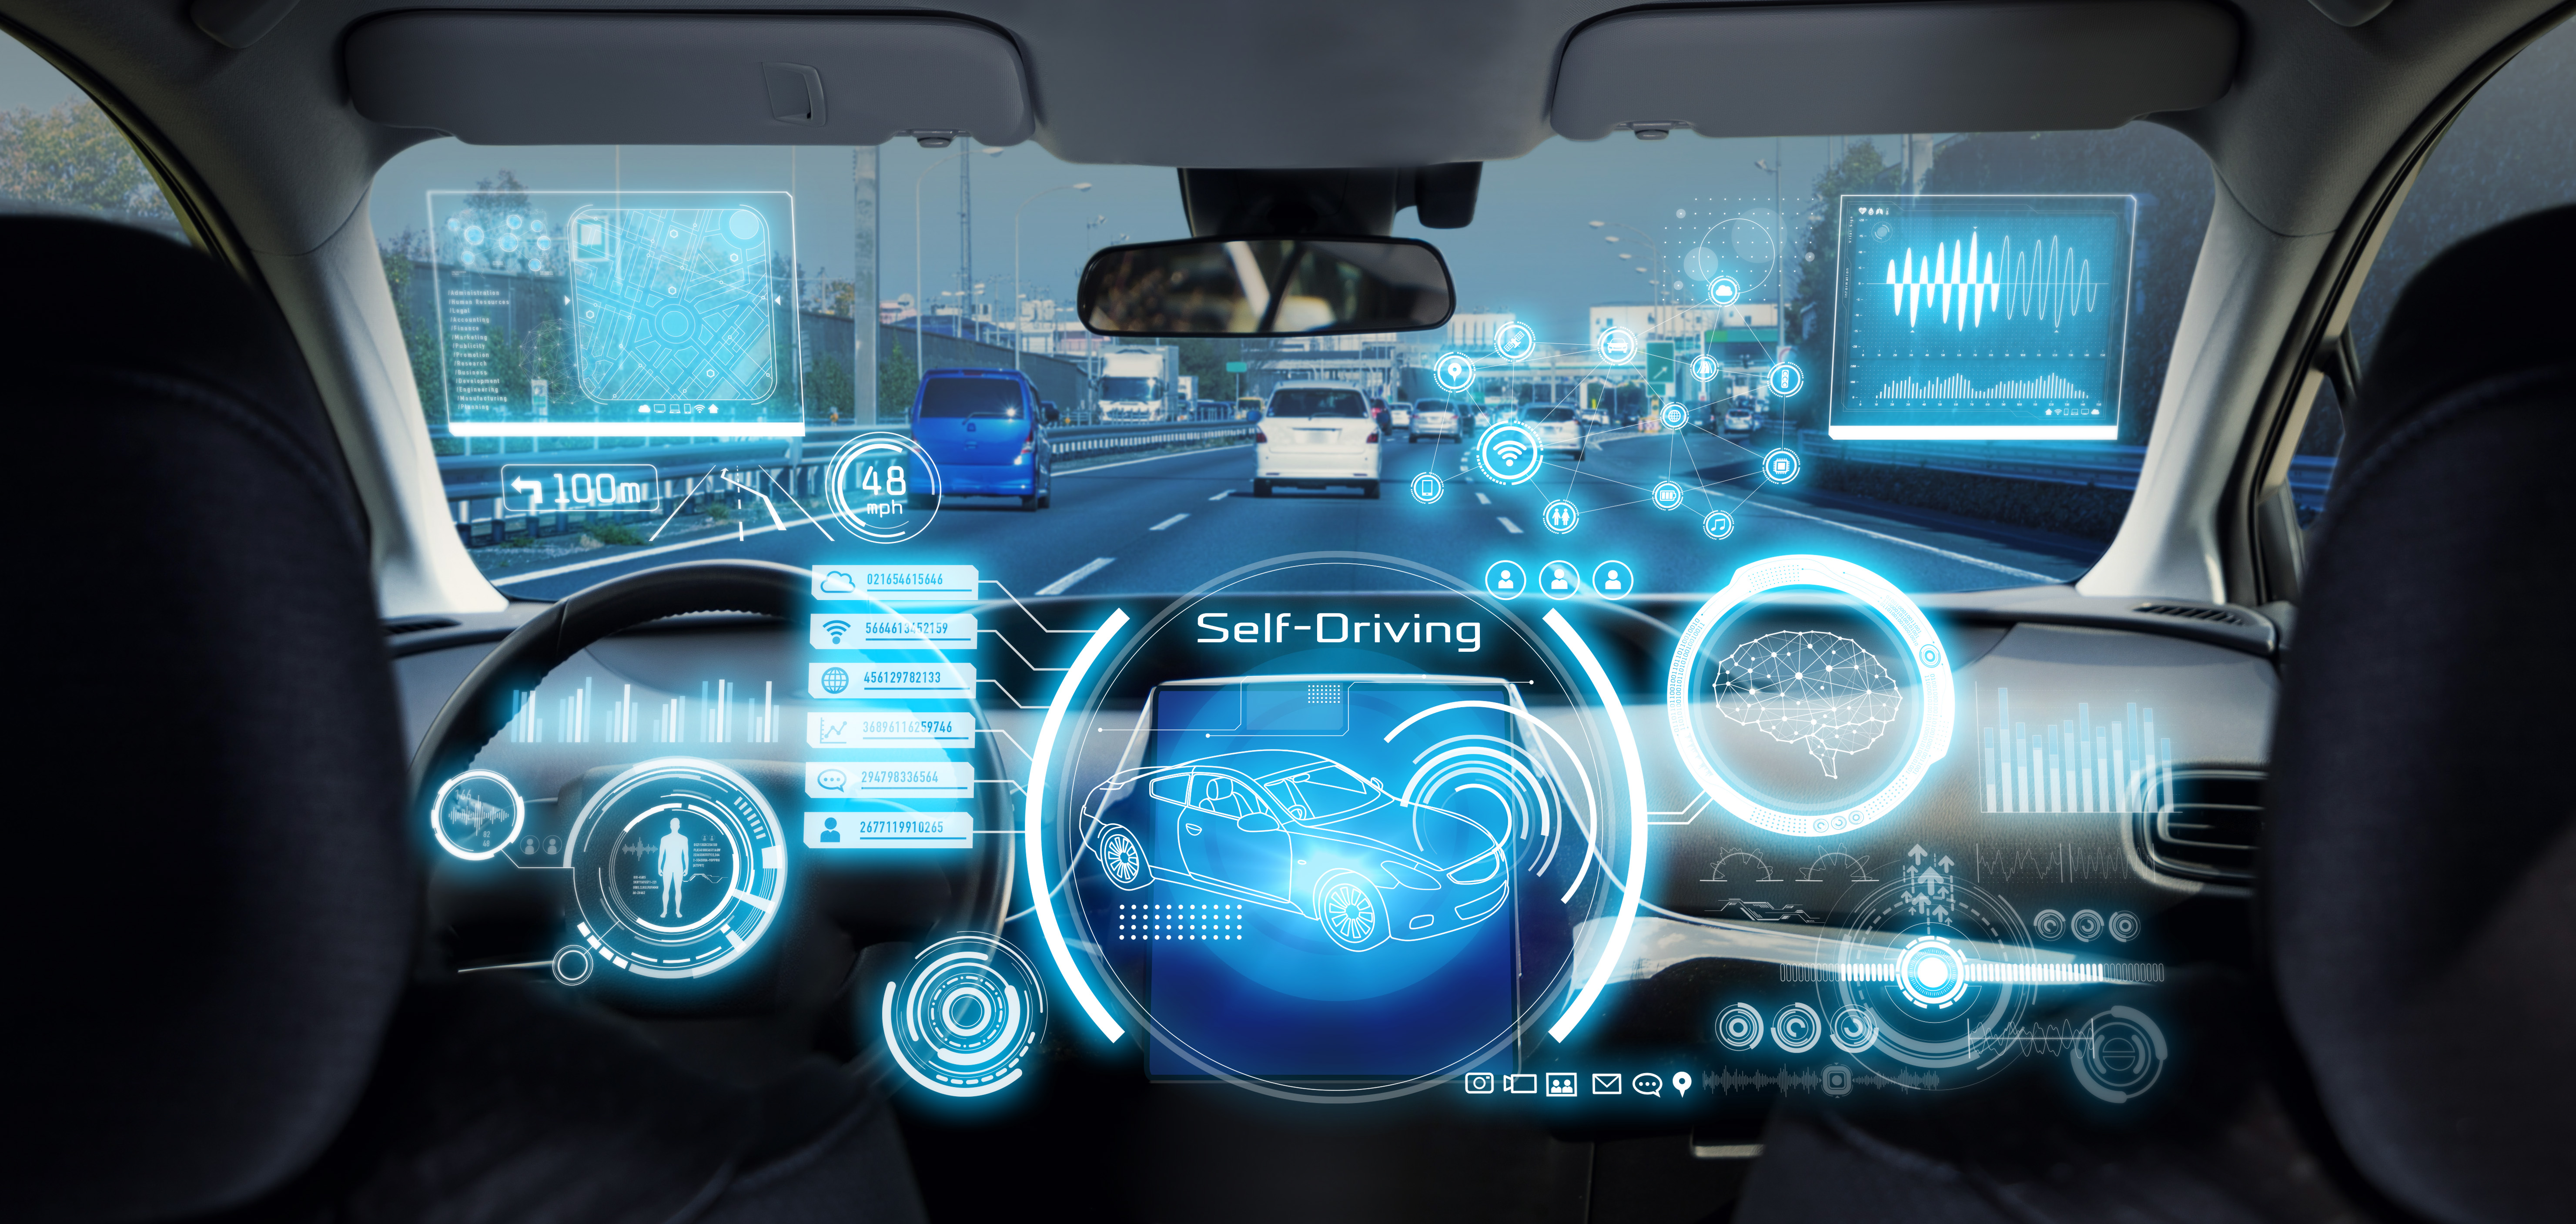 Artist rendition of dashboard of self-driving car.